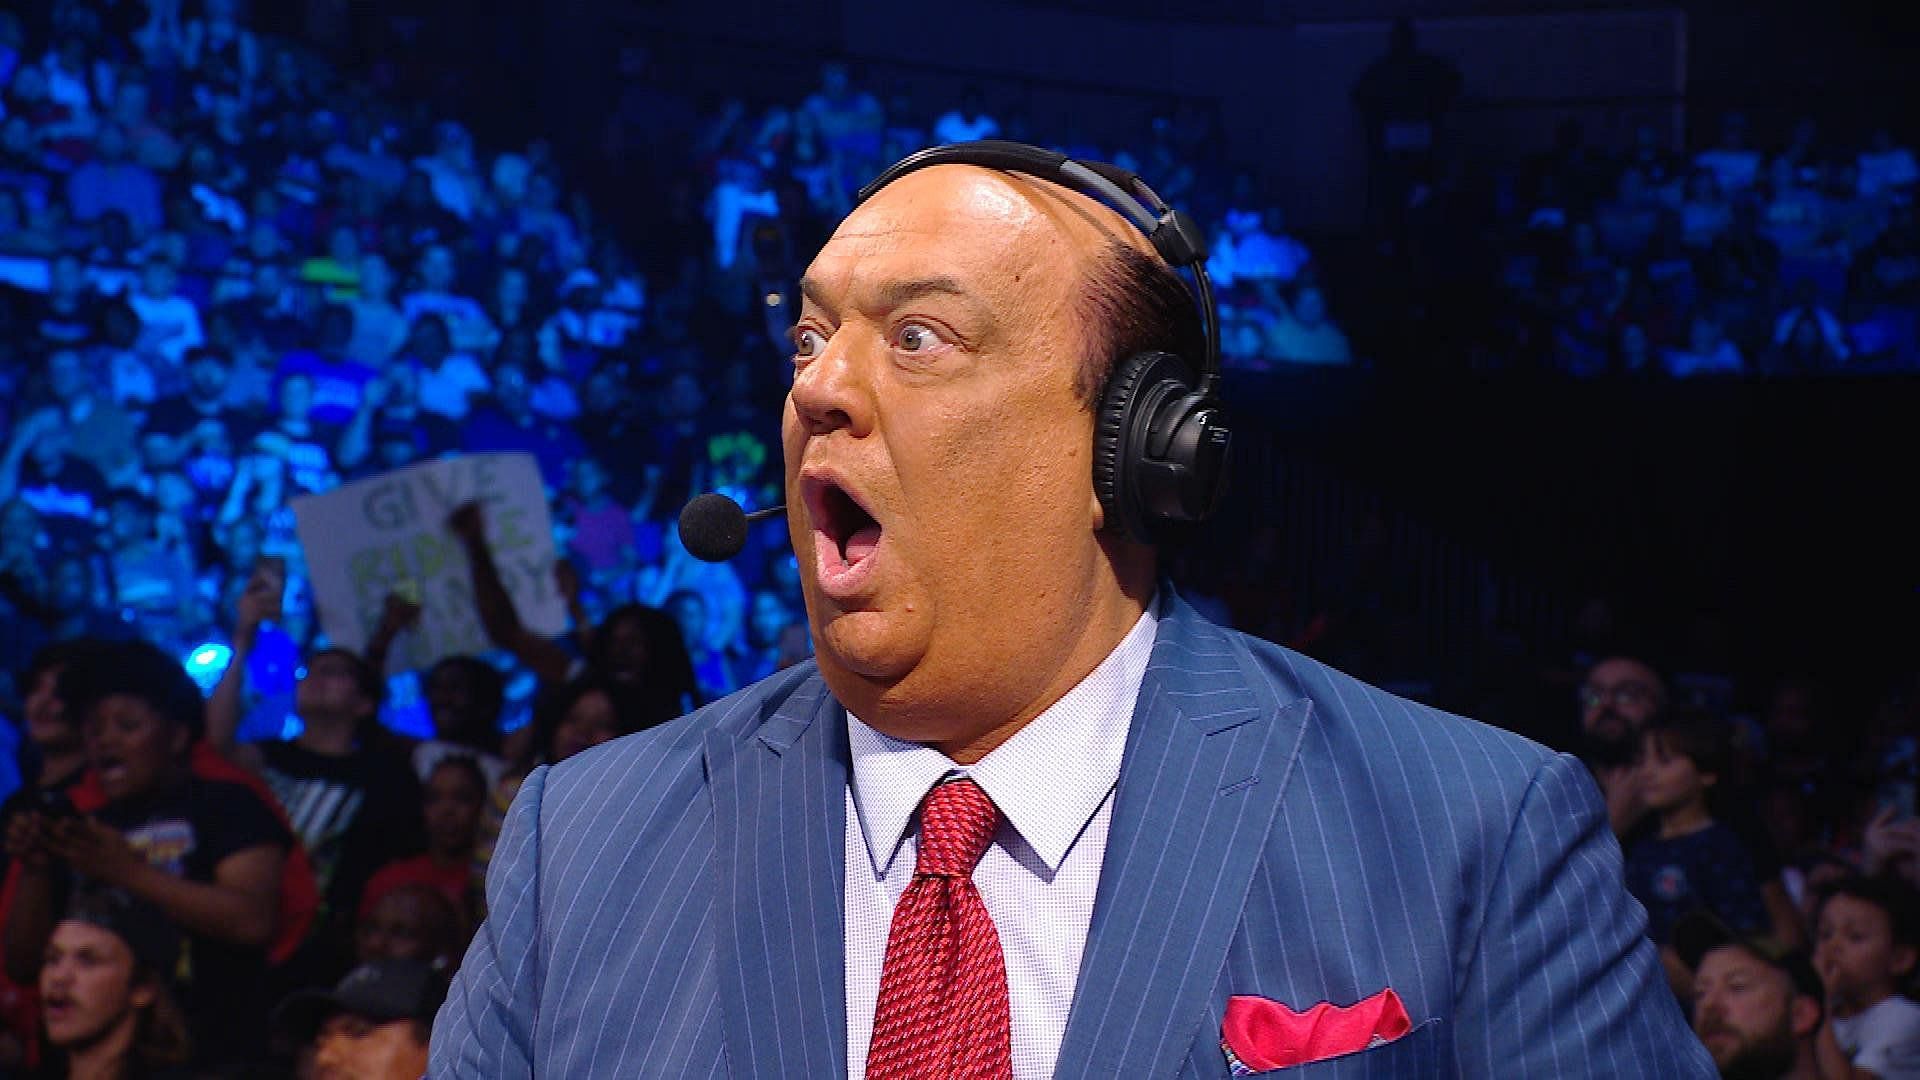 Paul Heyman does commentary on WWE SmackDown